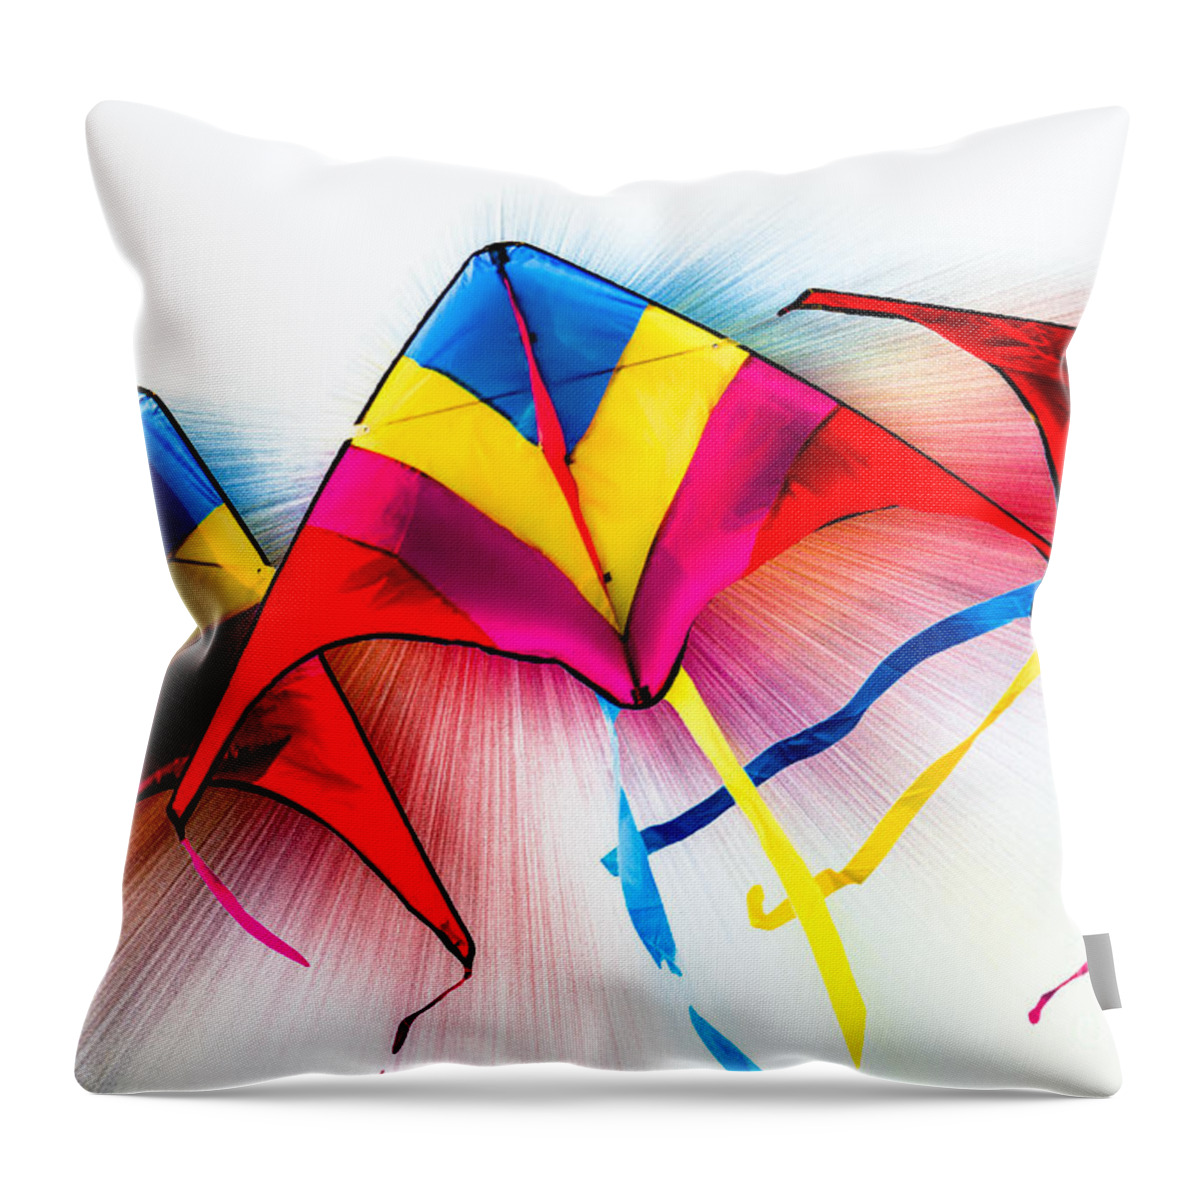 Kites Throw Pillow featuring the photograph Kites by Michael Arend